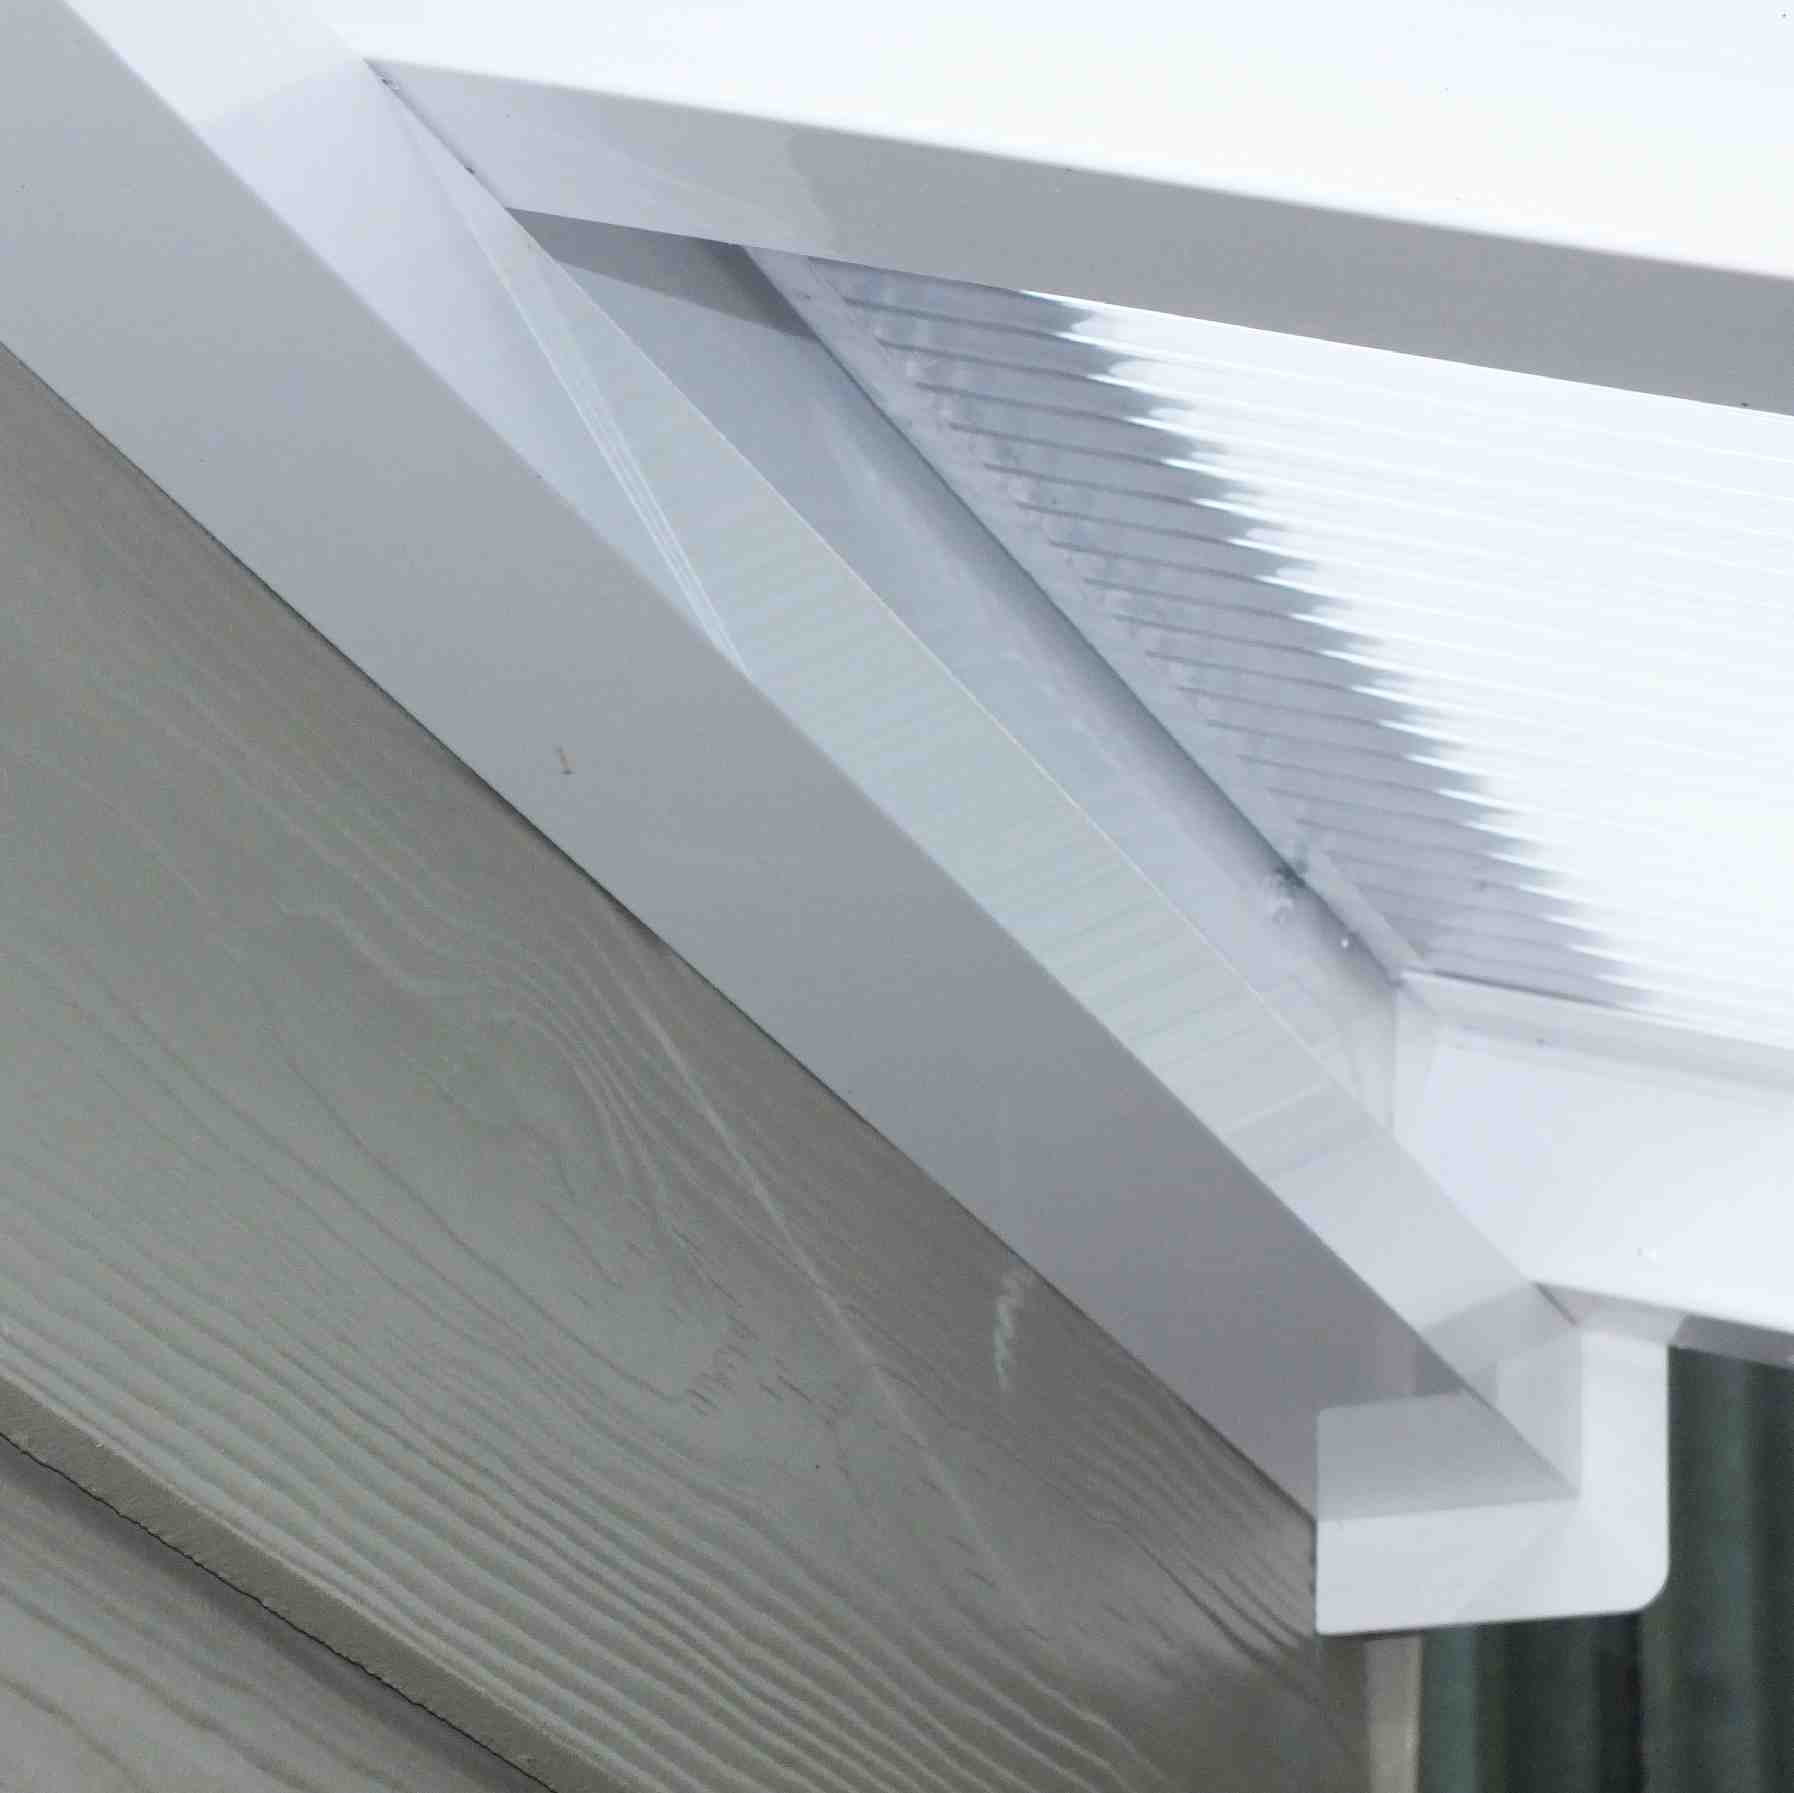 Great deals on Omega Verandah White with 16mm Polycarbonate Glazing - 6.3m (W) x 1.5m (P), (4) Supporting Posts